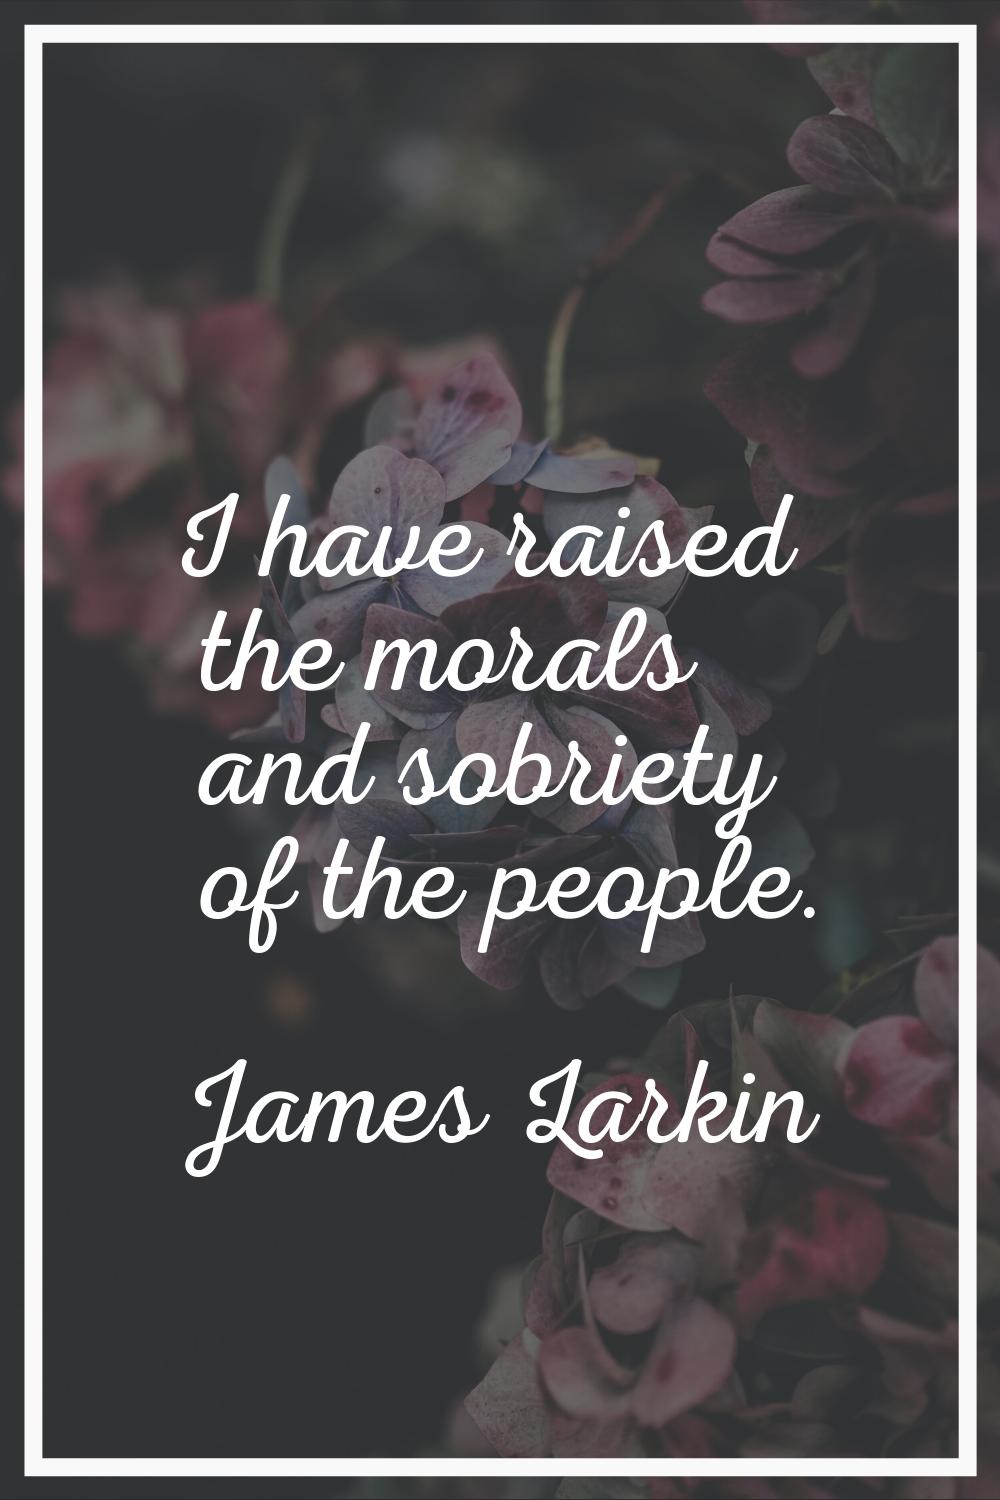 I have raised the morals and sobriety of the people.